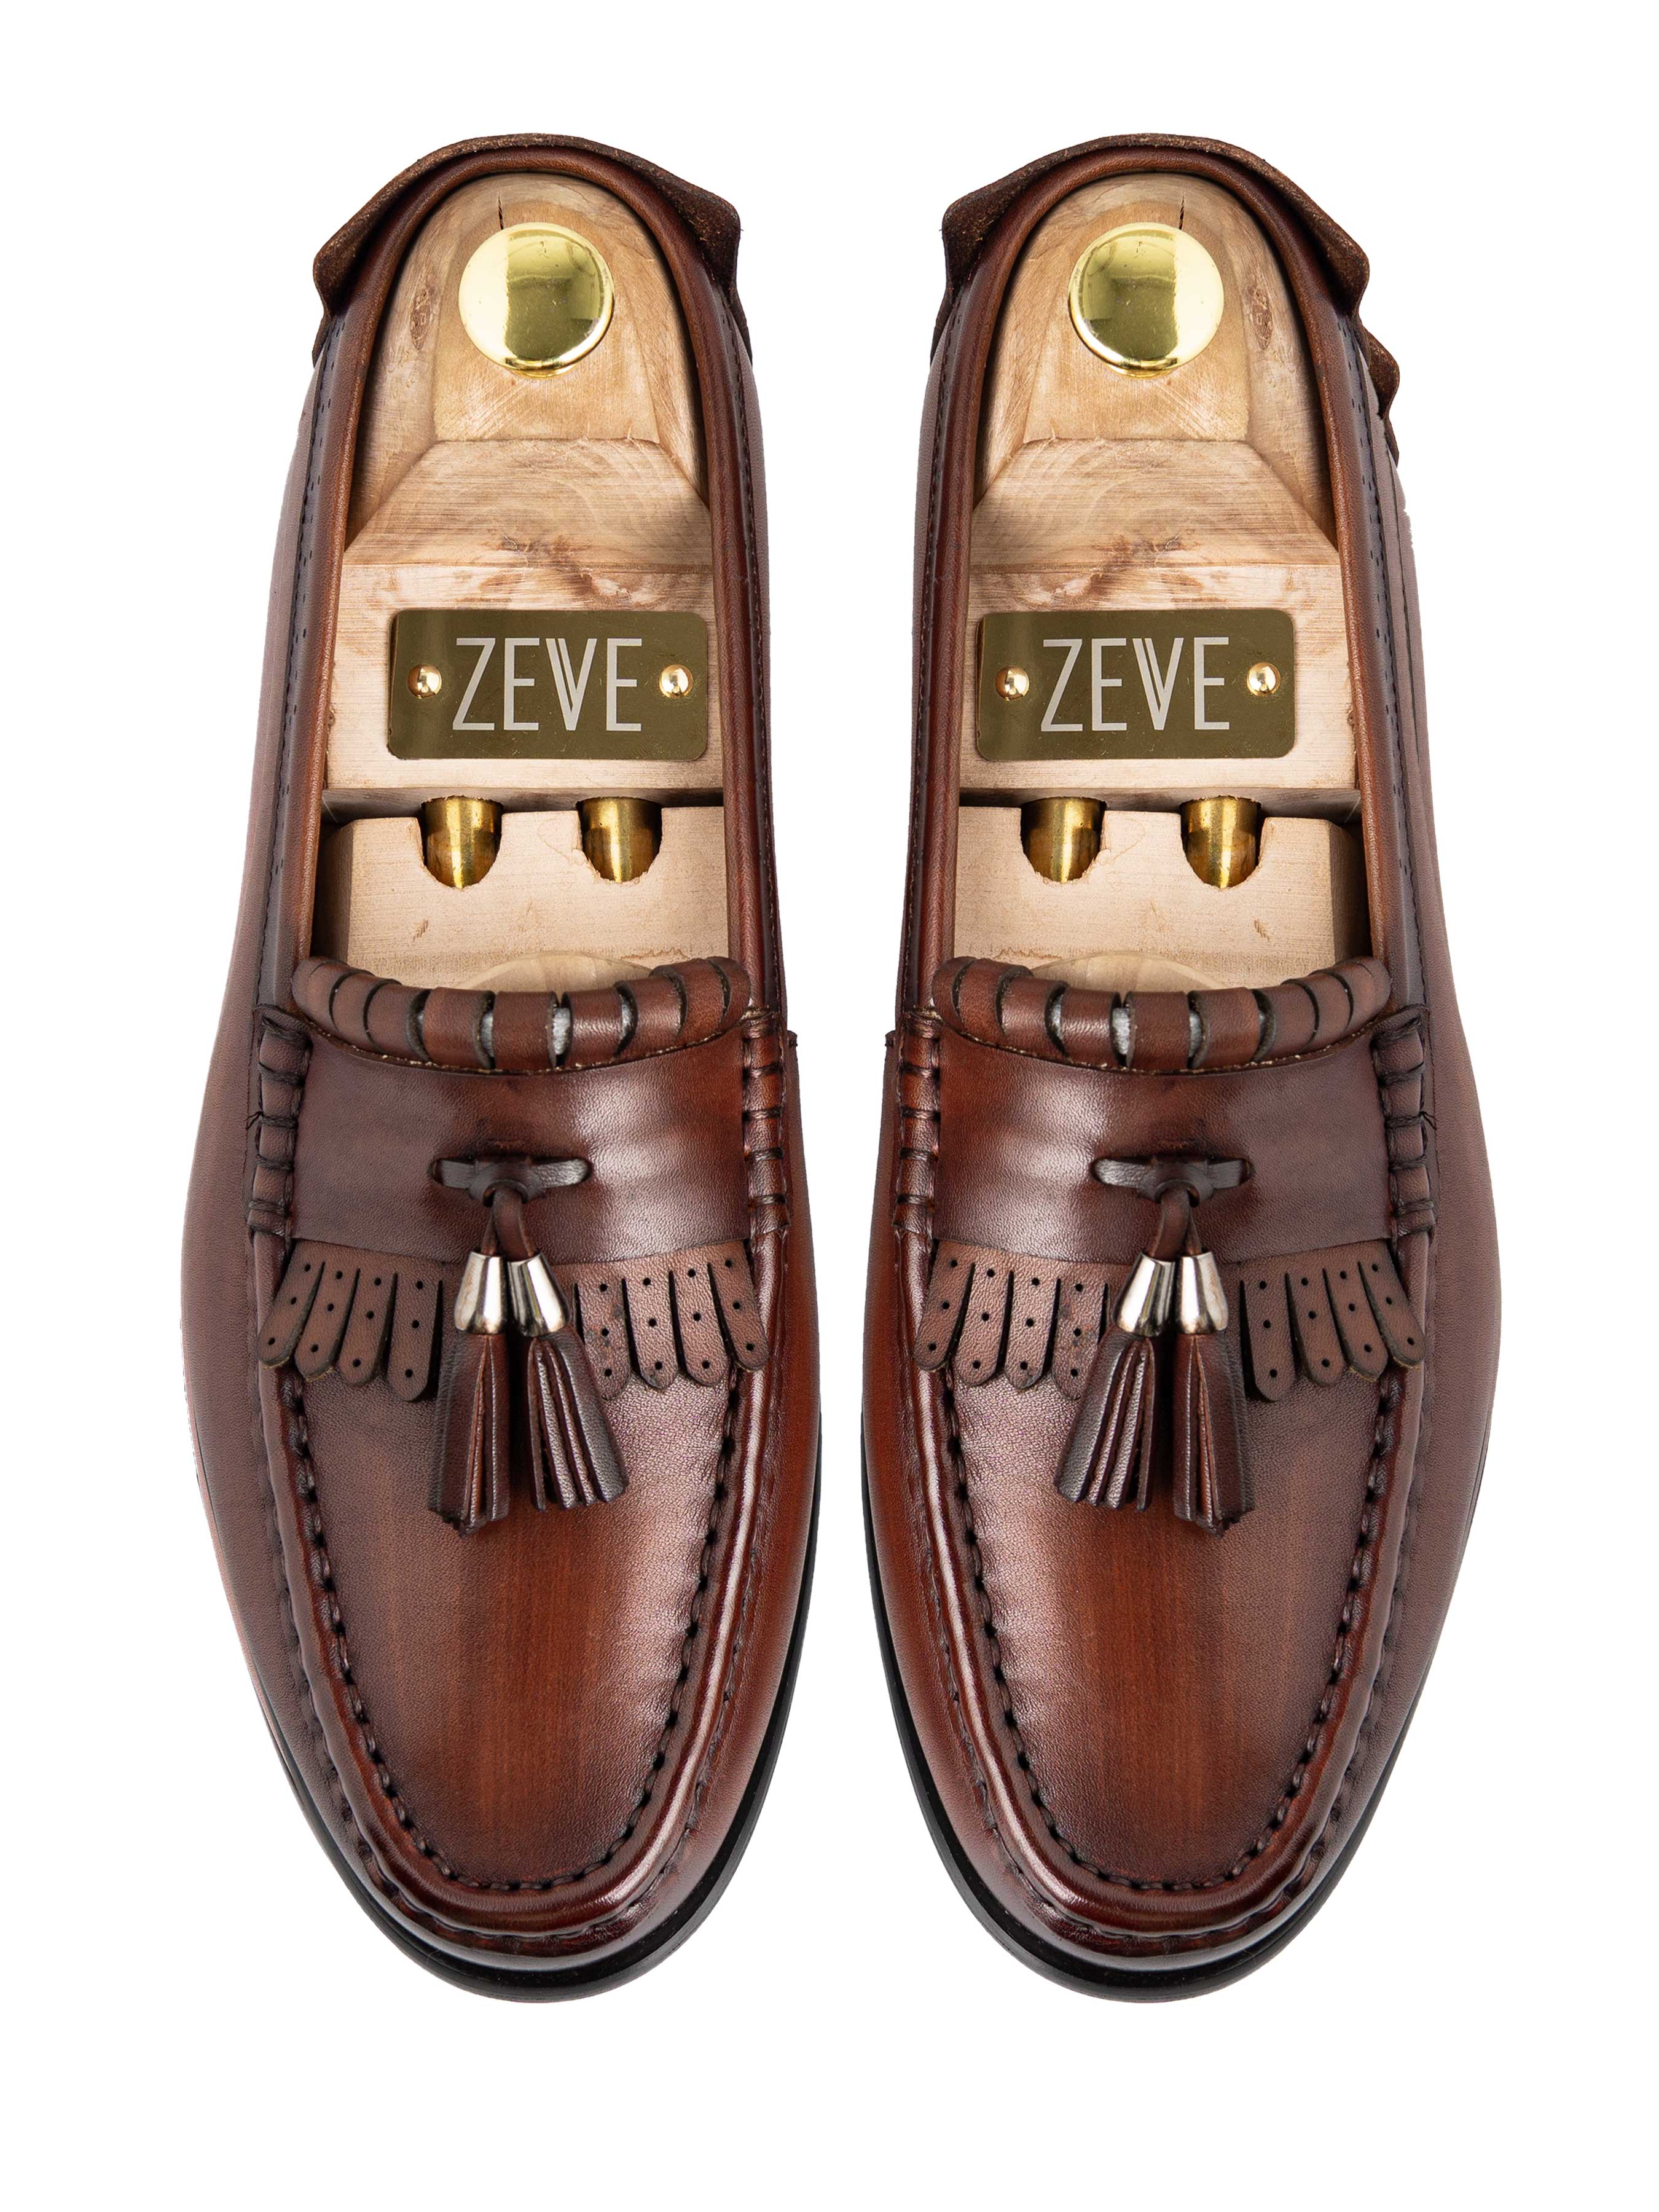 Fringe Classic Loafer - Cognac Tan with Tassel (Hand Painted Patina) - Zeve Shoes